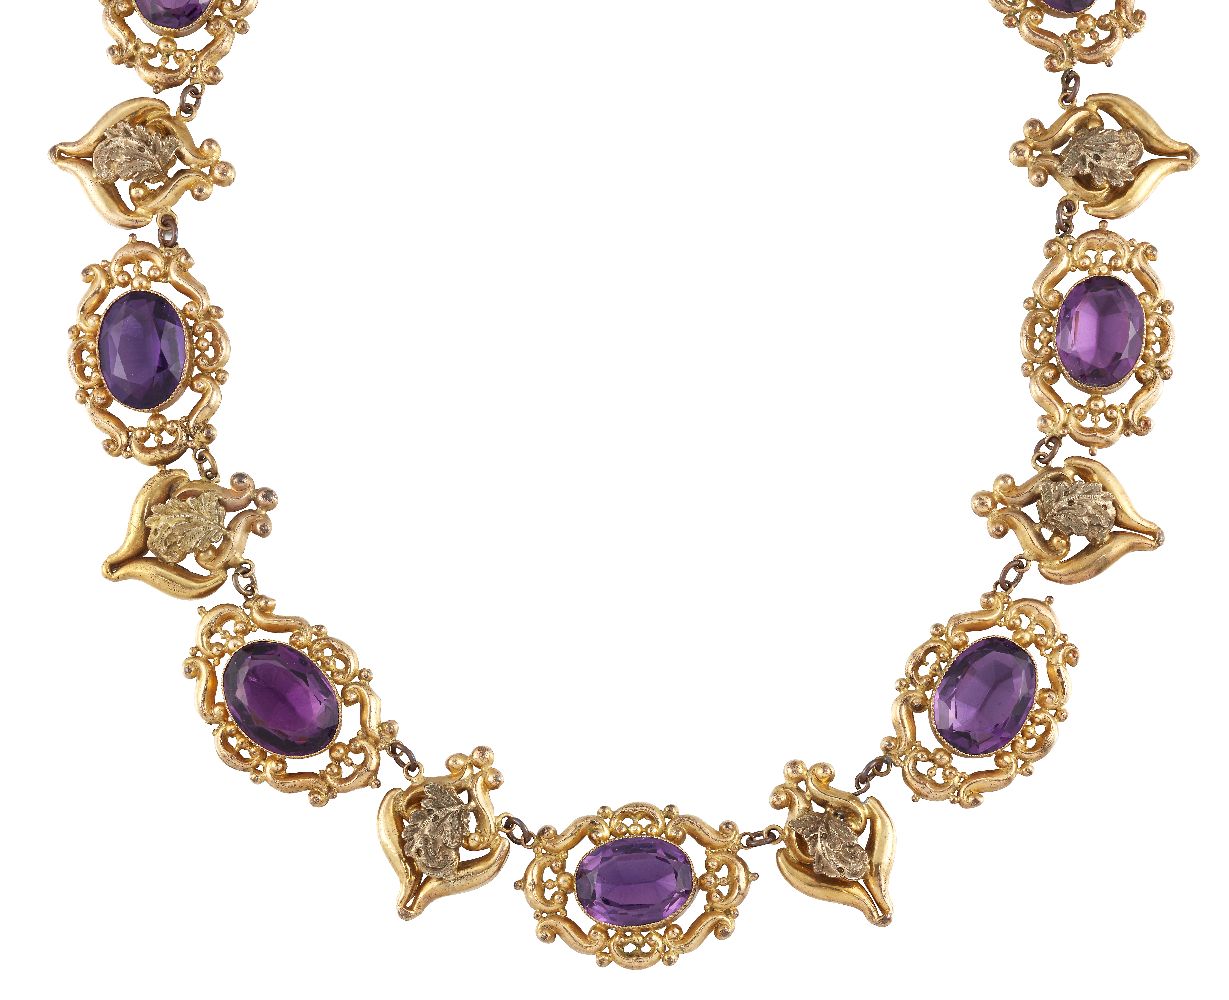 An early Victorian gilt-mounted purple paste necklace, composed of a a series of oval purple